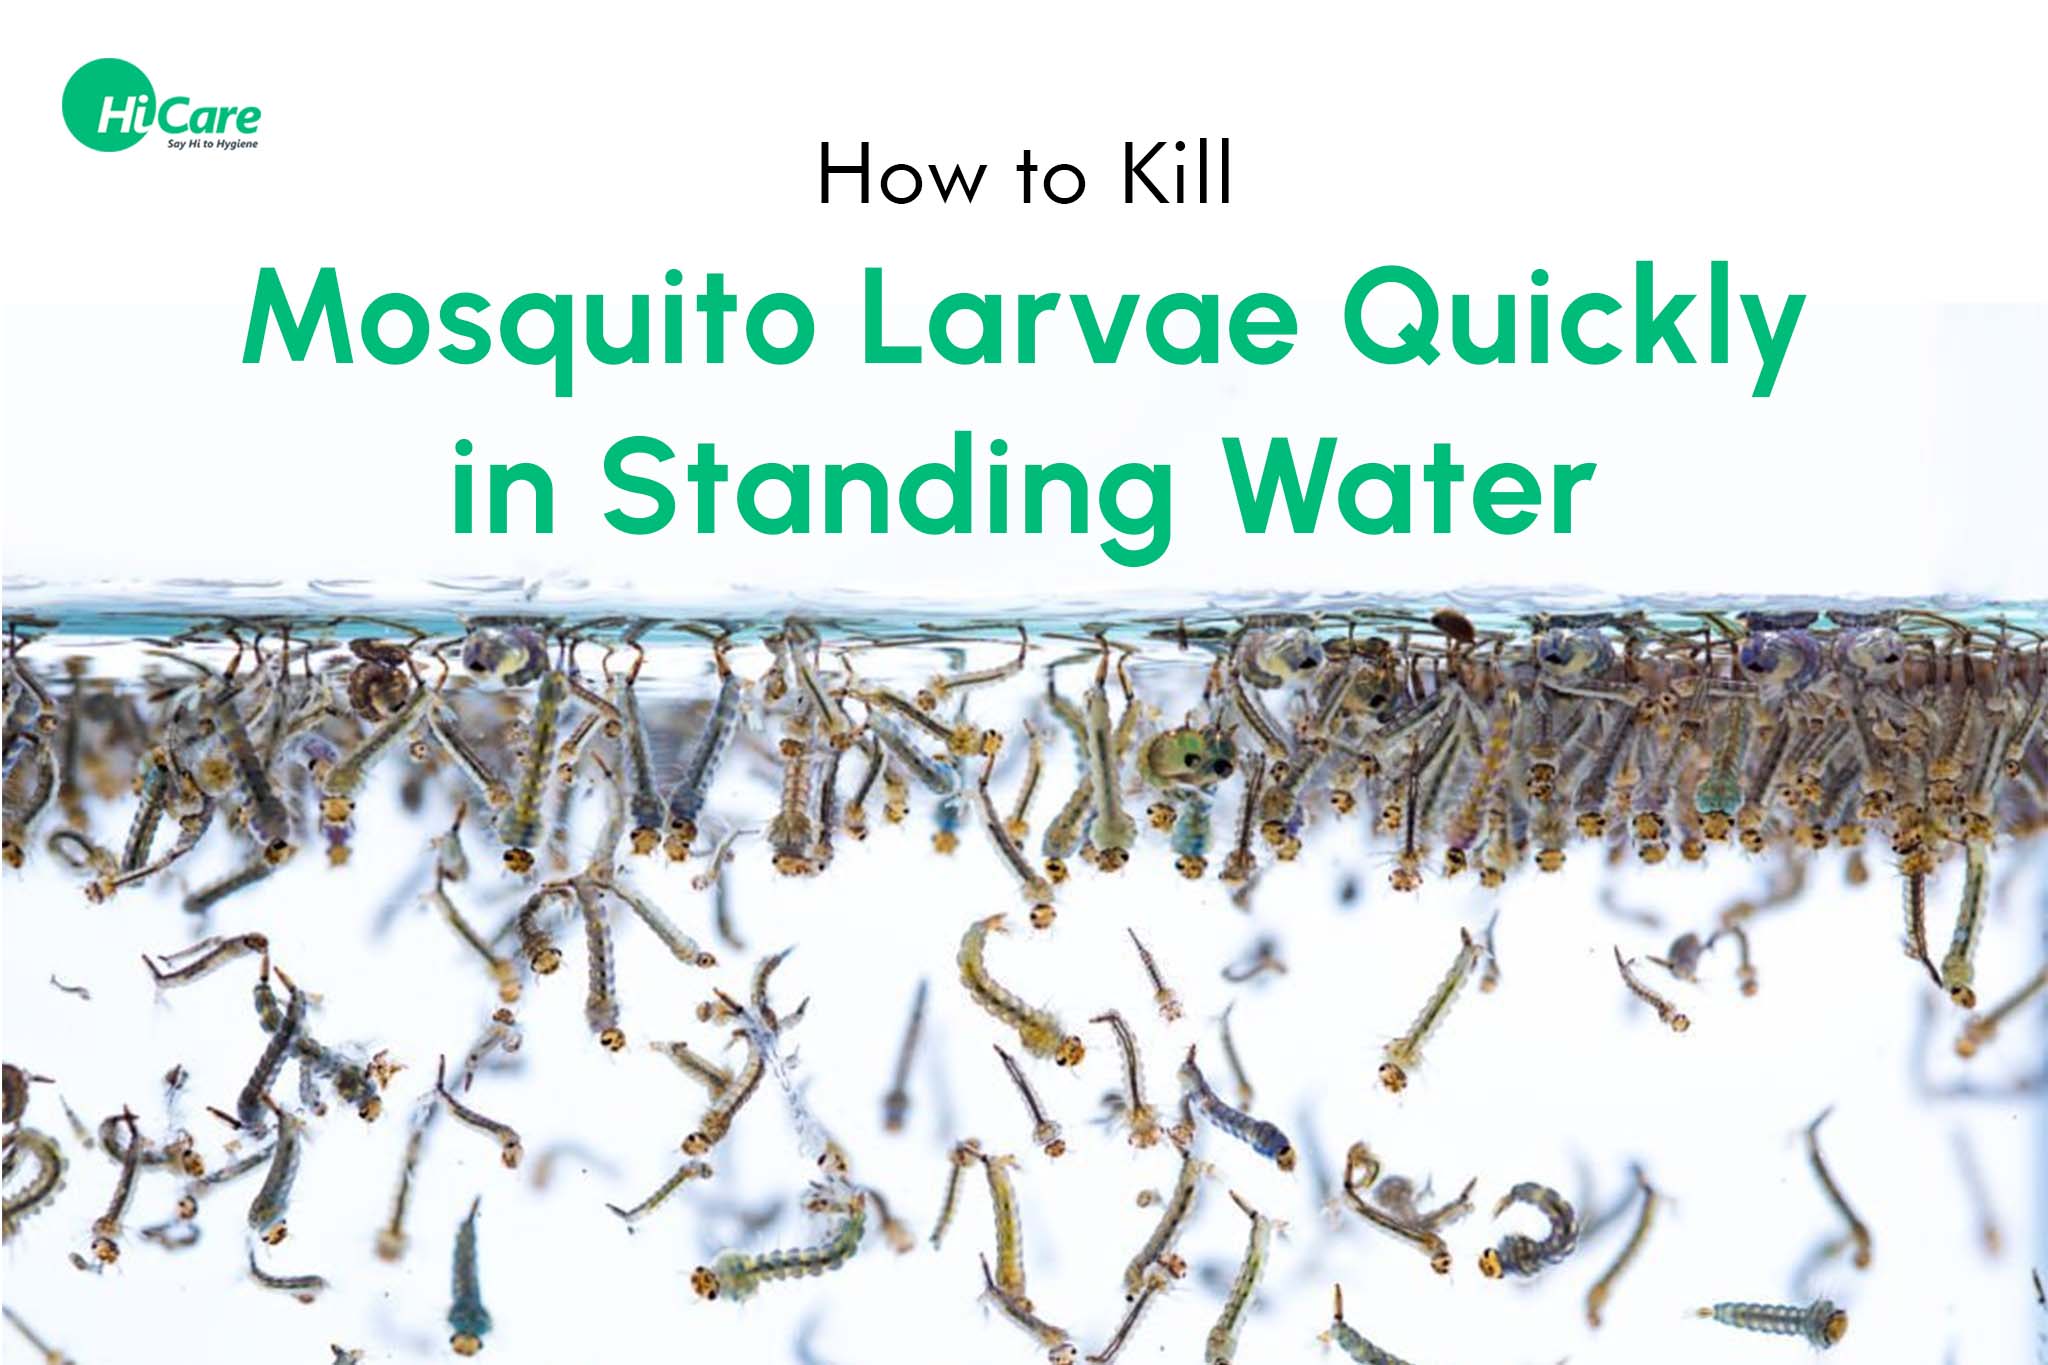 How to Kill Mosquito Larvae Quickly in Standing Water?